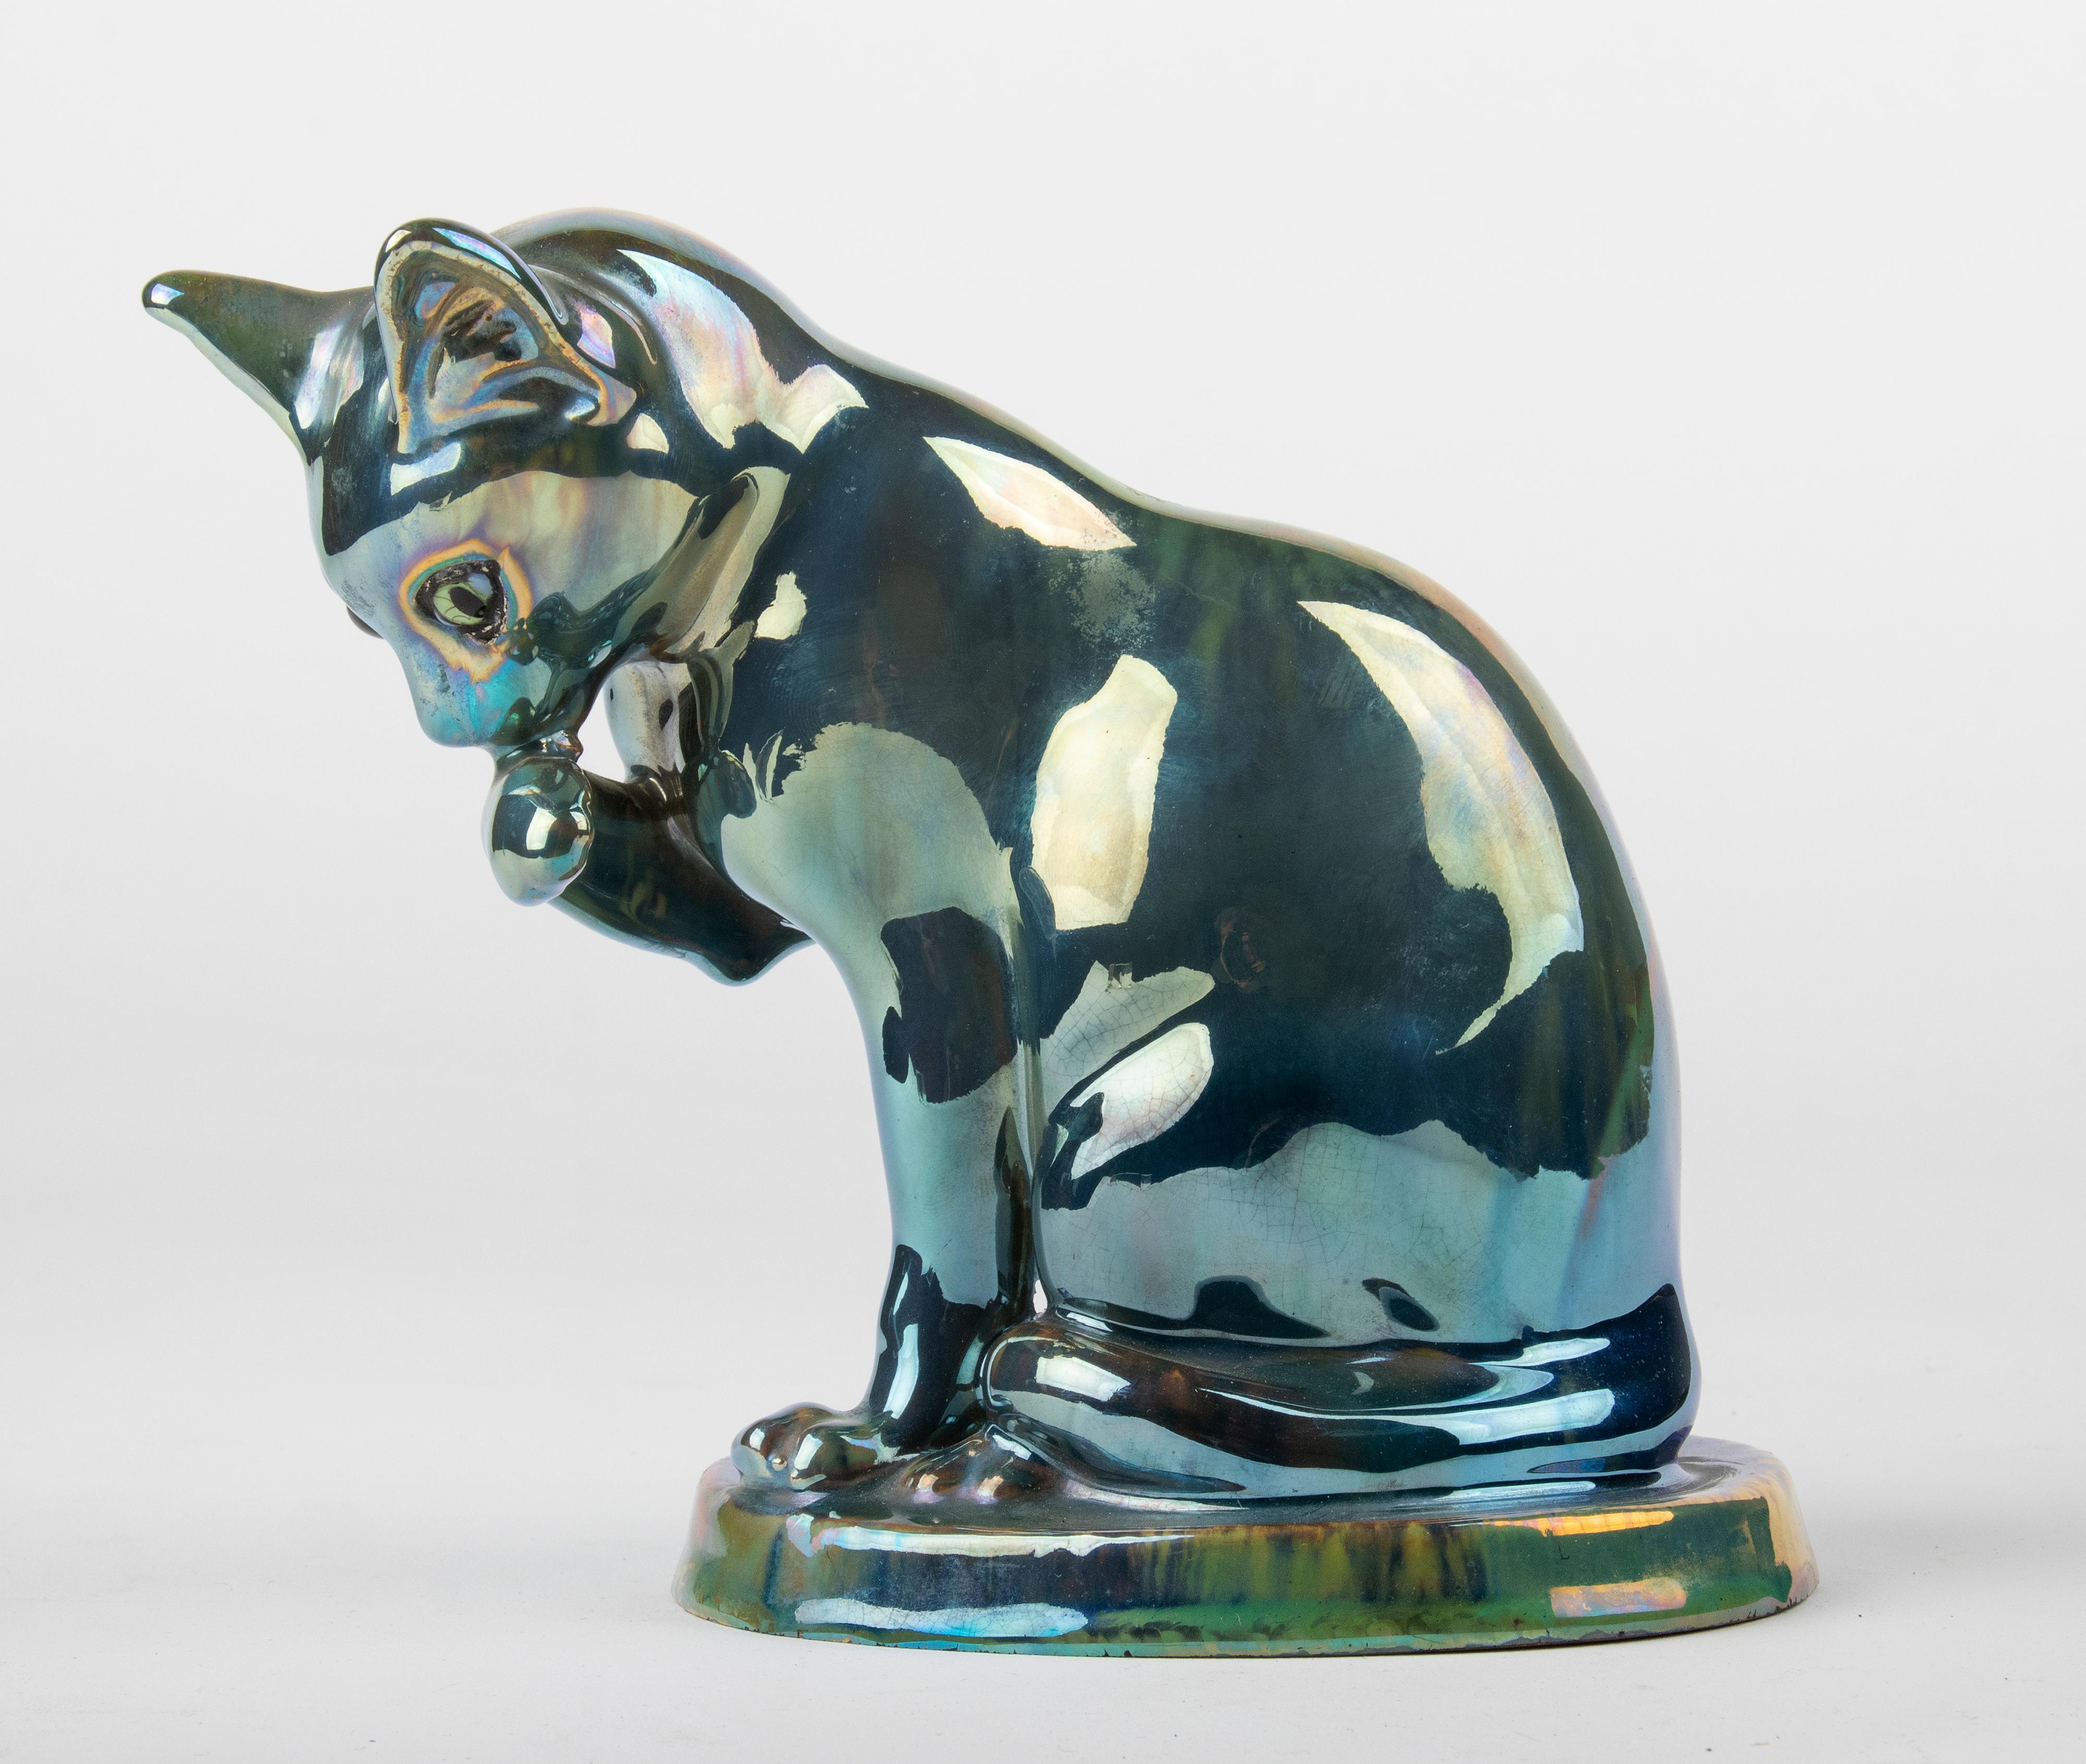 Lovely ceramic figurine of a cat from the Art Deco period. The cat is marked 'Rambervillers', 'Unis France' and 'A. Cytère'. The figurine has a nice blue / green / purple iridescent metal glaze, called Gres flammes.
Designed by the ceramist